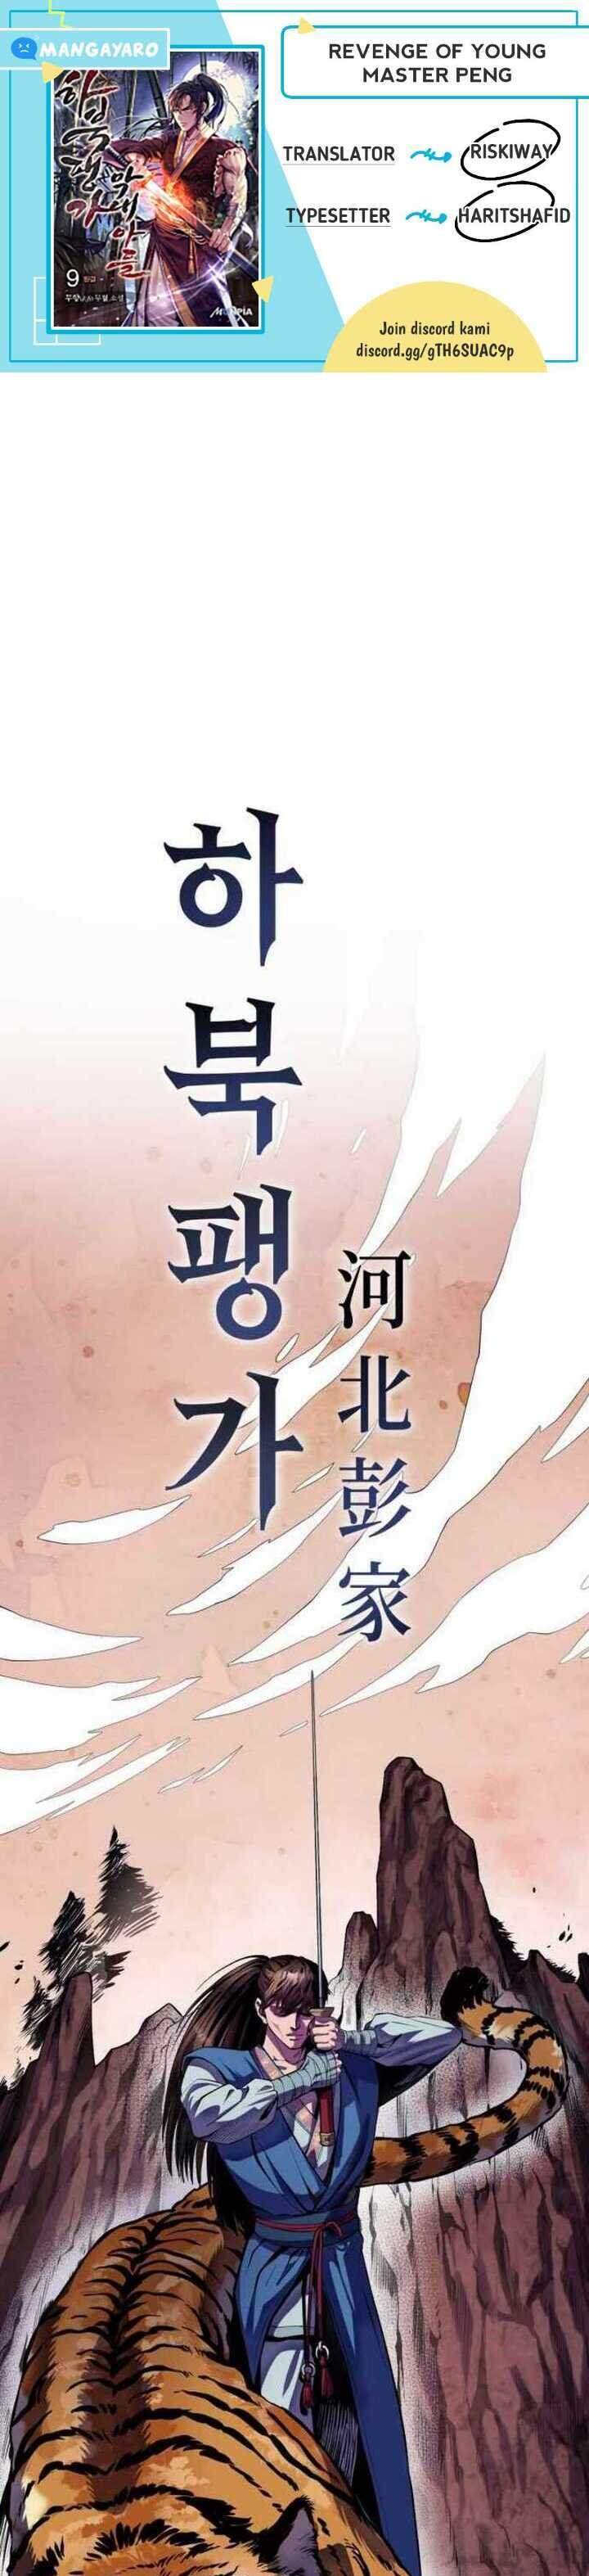 Revenge Of Young Master Peng Chapter 01.1 - 241